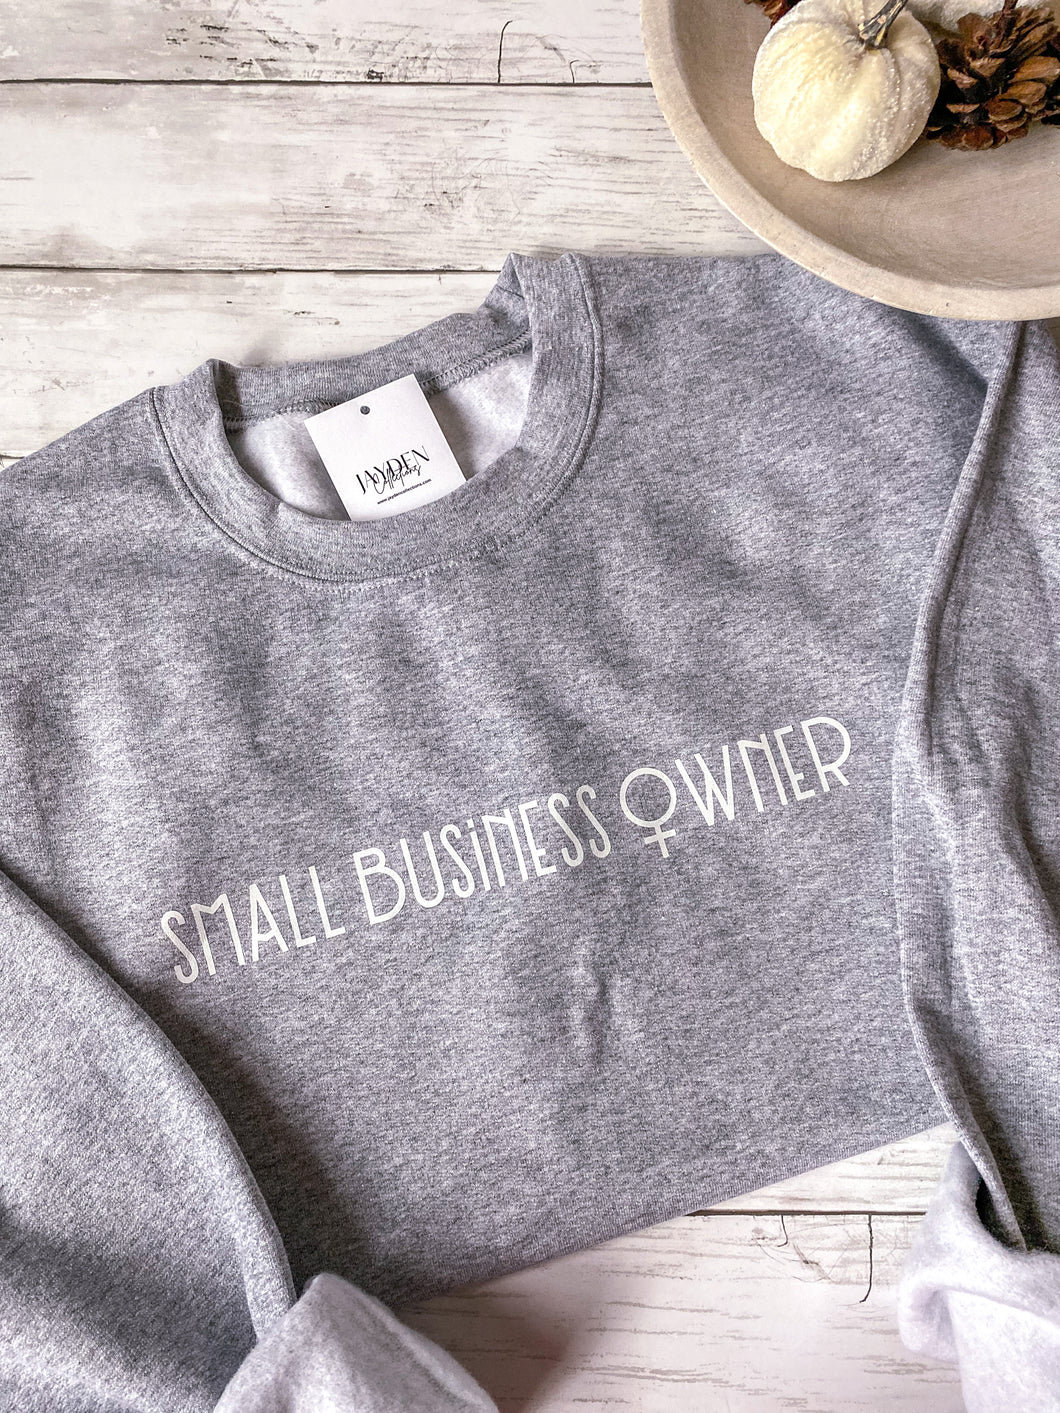 Small Business Owner Crew neck